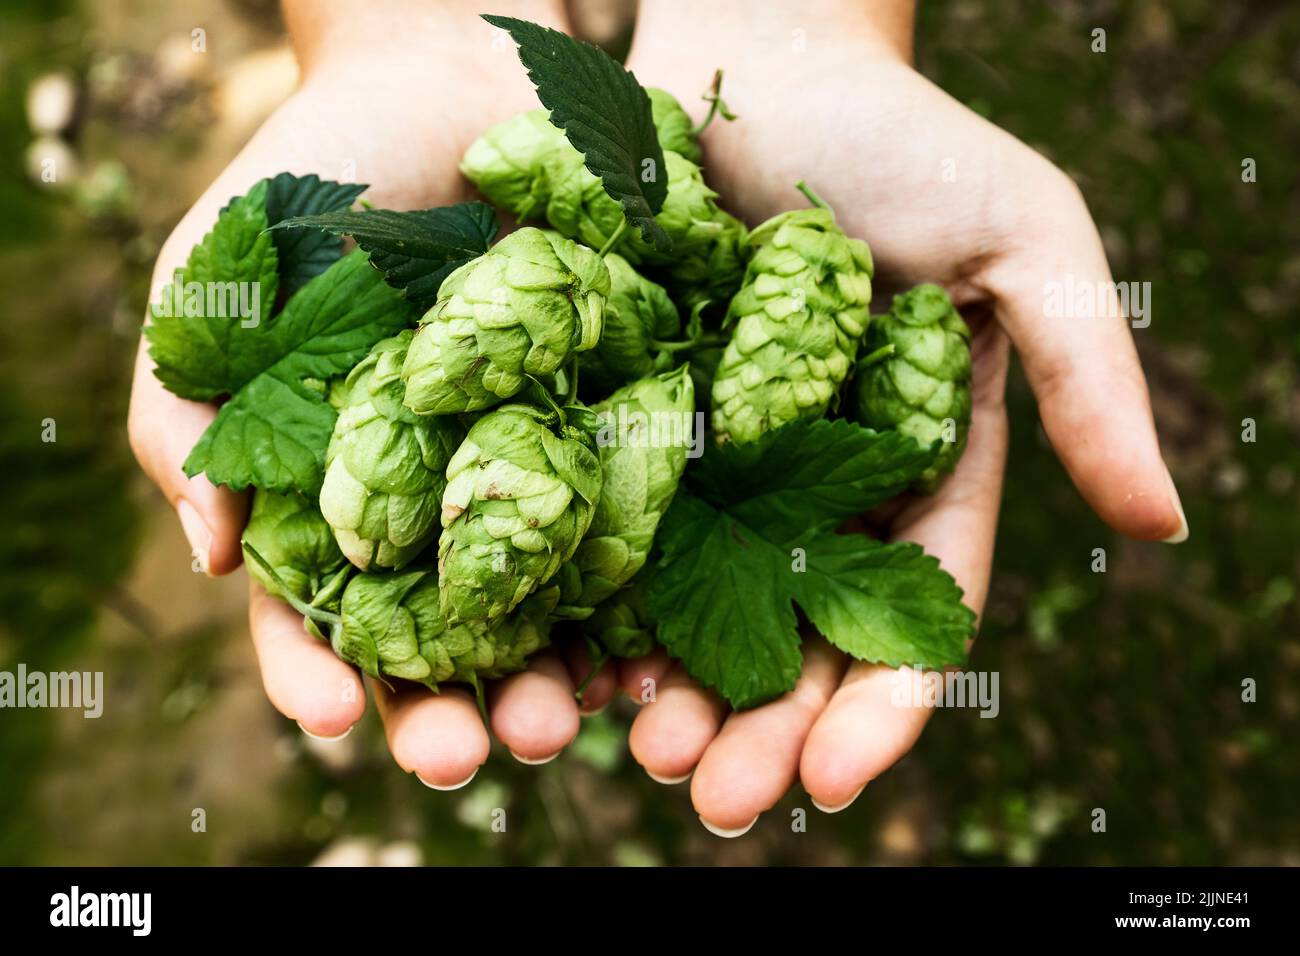 Hands of a girl holding a handful of hop cones. Leon, Spain Stock Photo